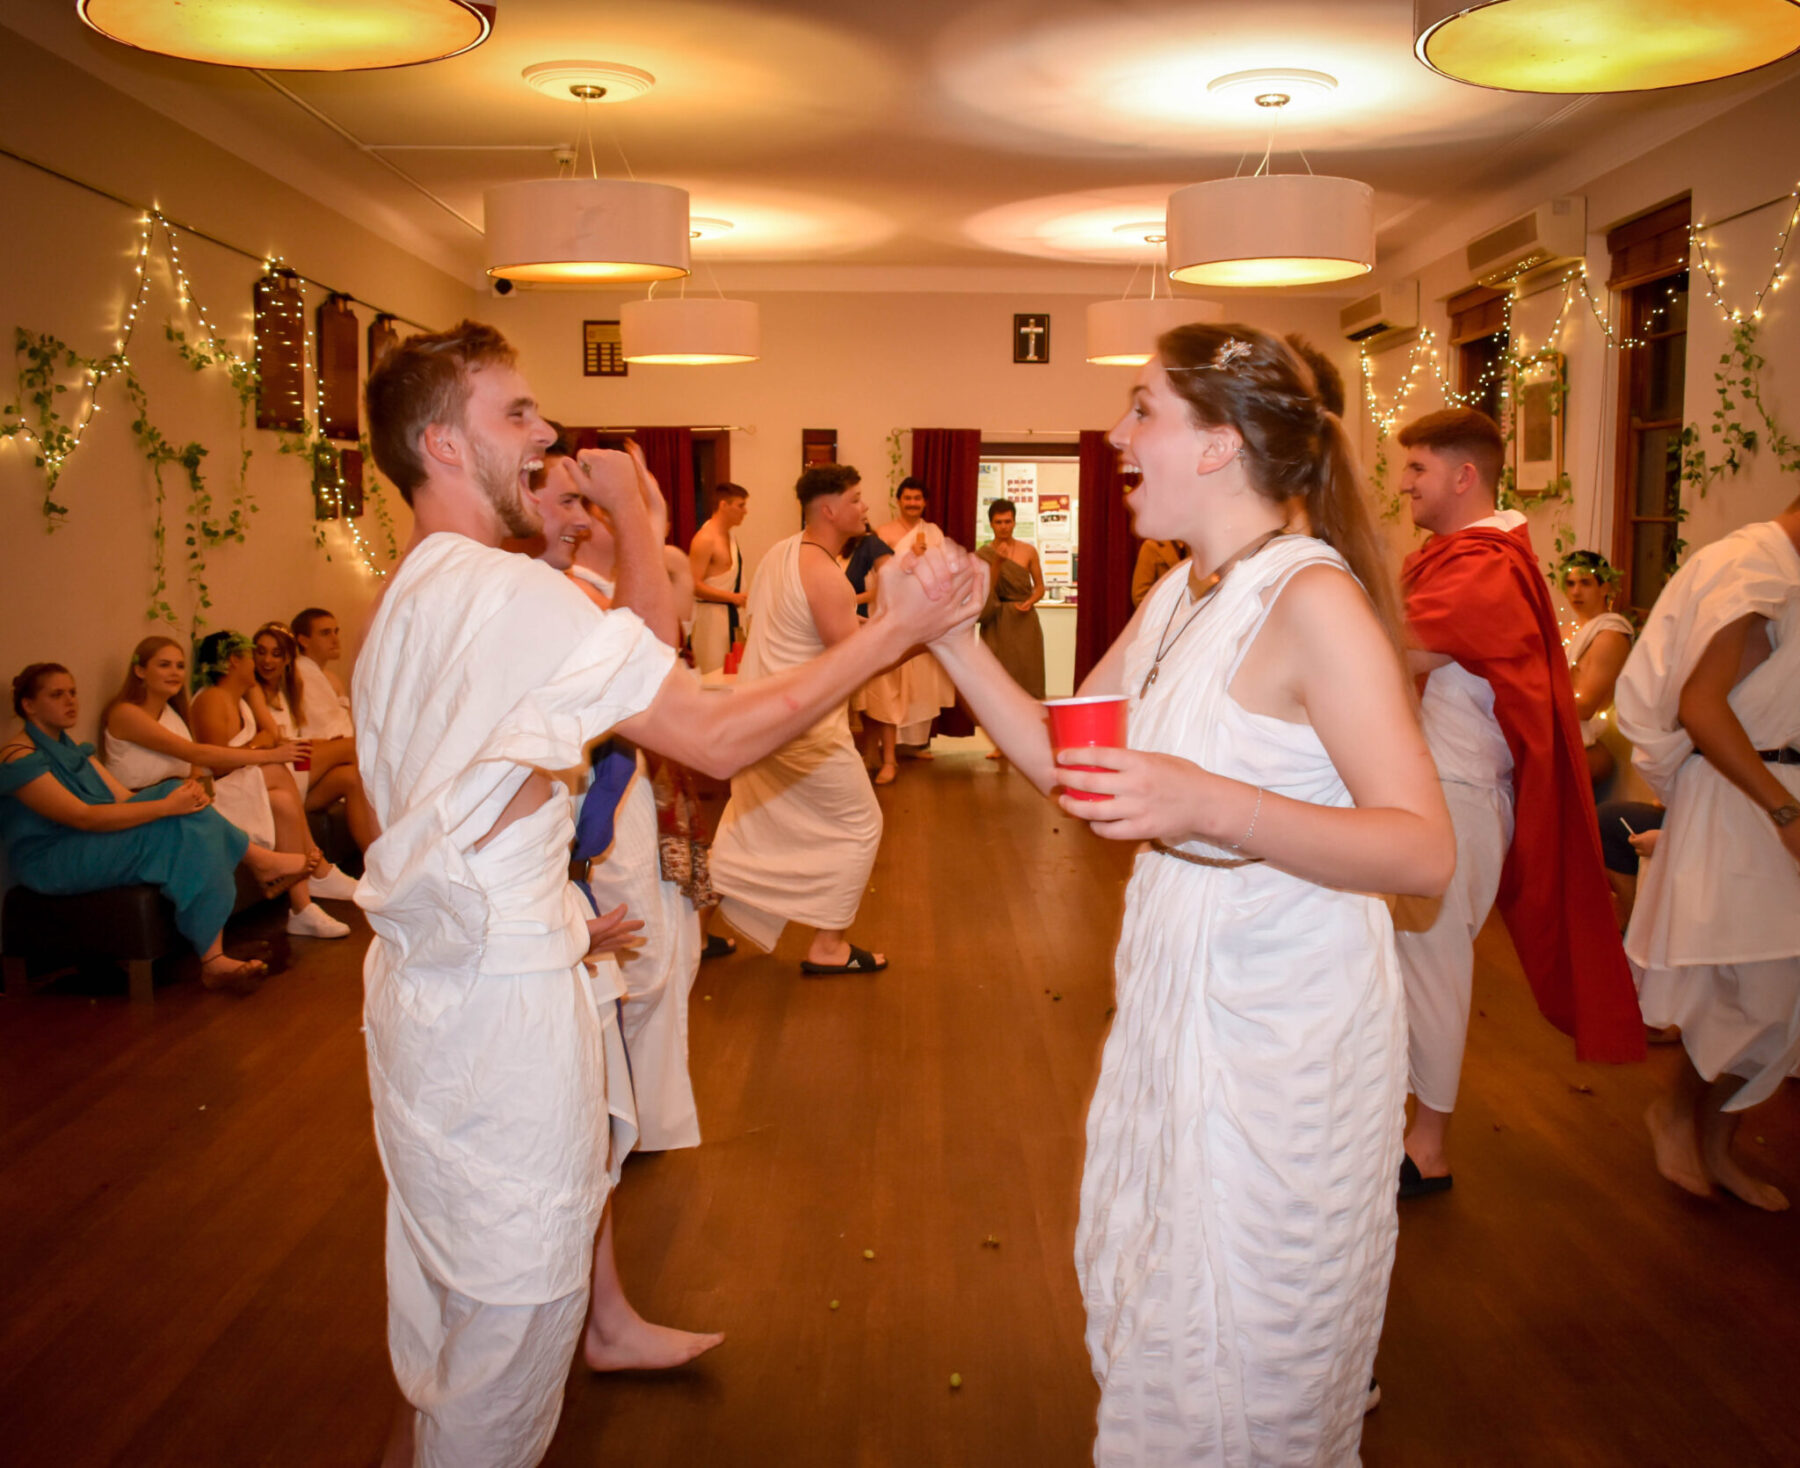 Classics-Week-Toga-Party-2021-Edited-19-scaled-1. Campion College Australia.